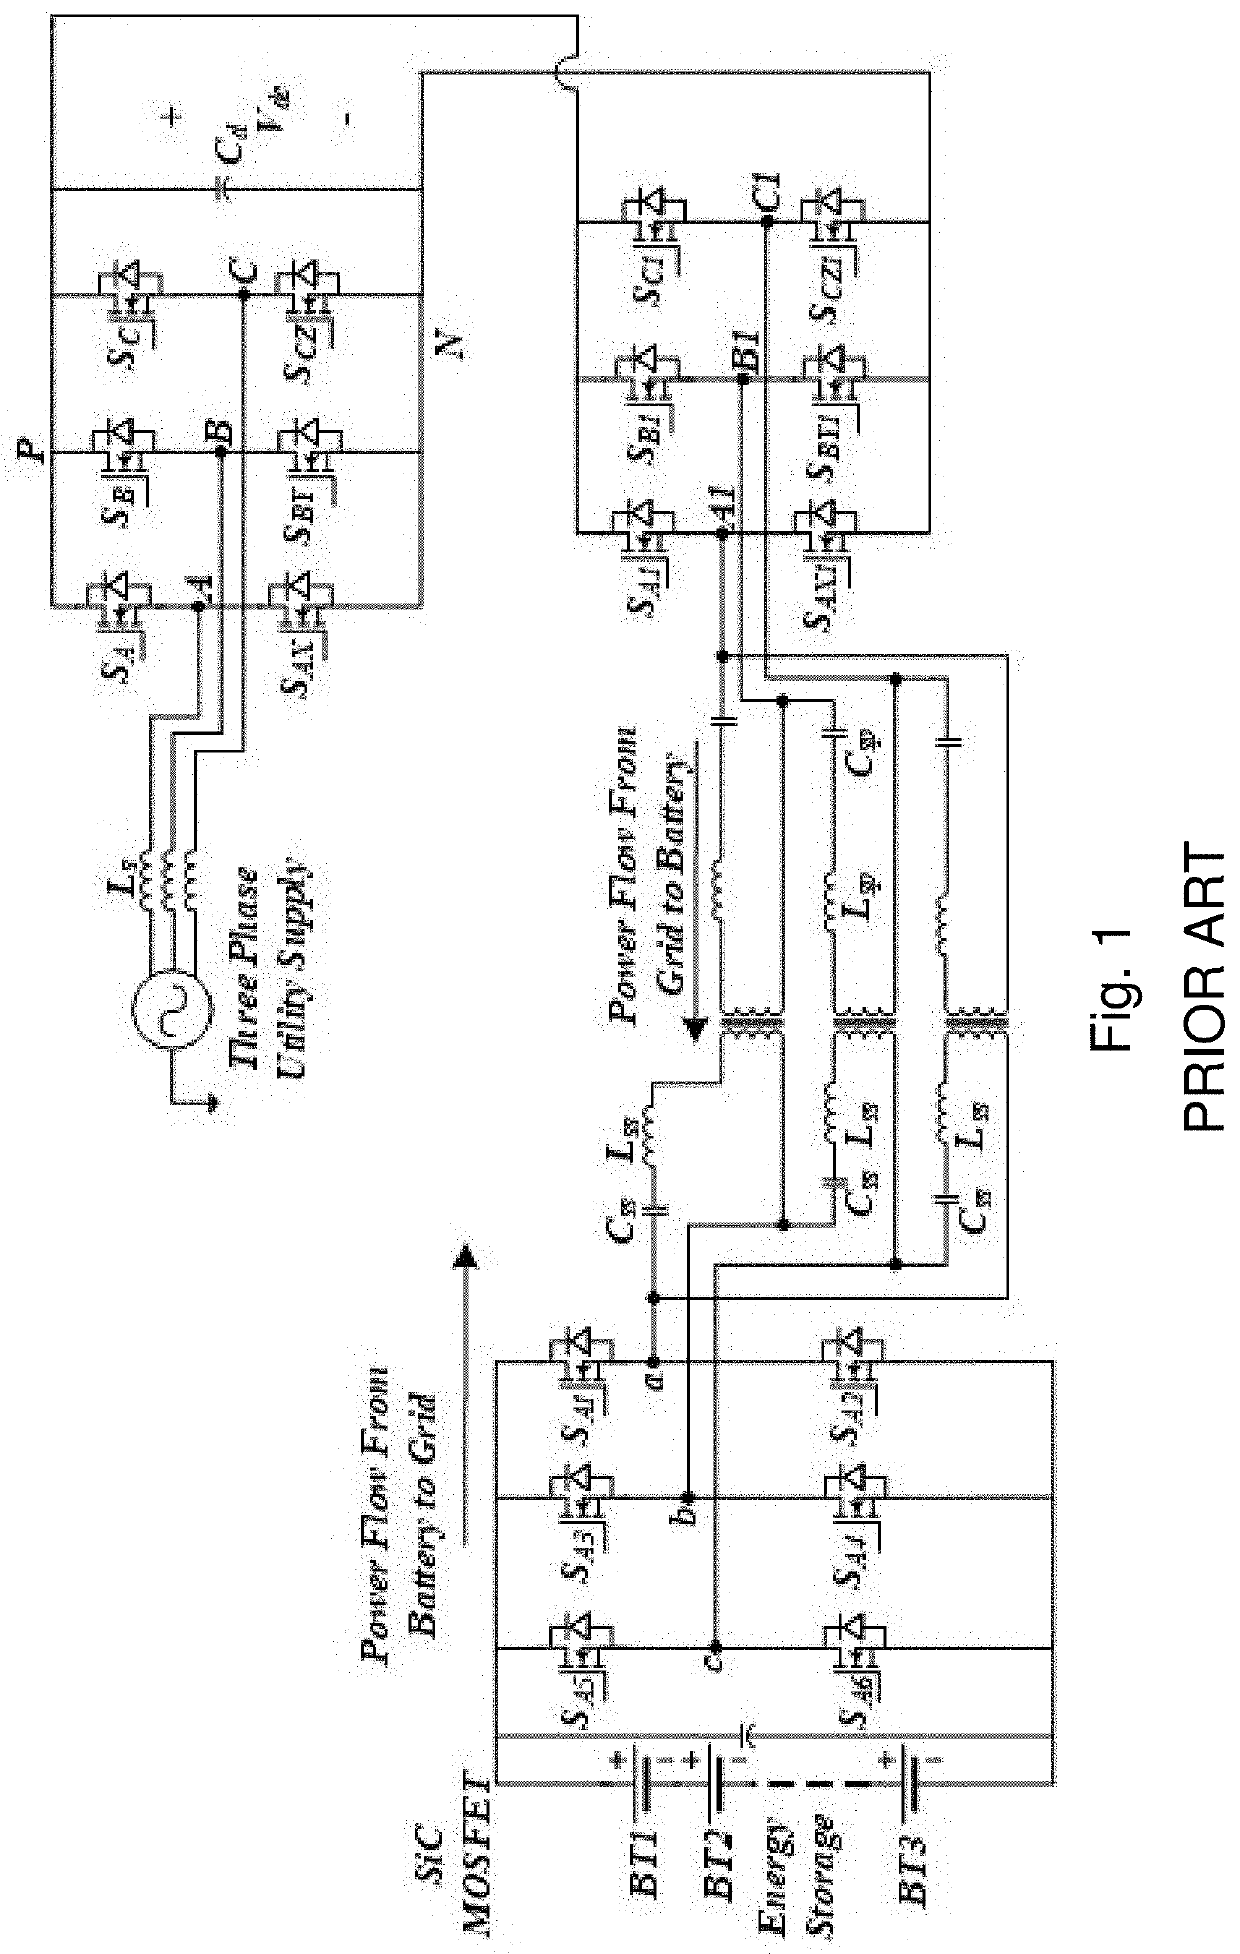 Three phase bidirectional ac-dc converter with bipolar voltage fed resonant stages